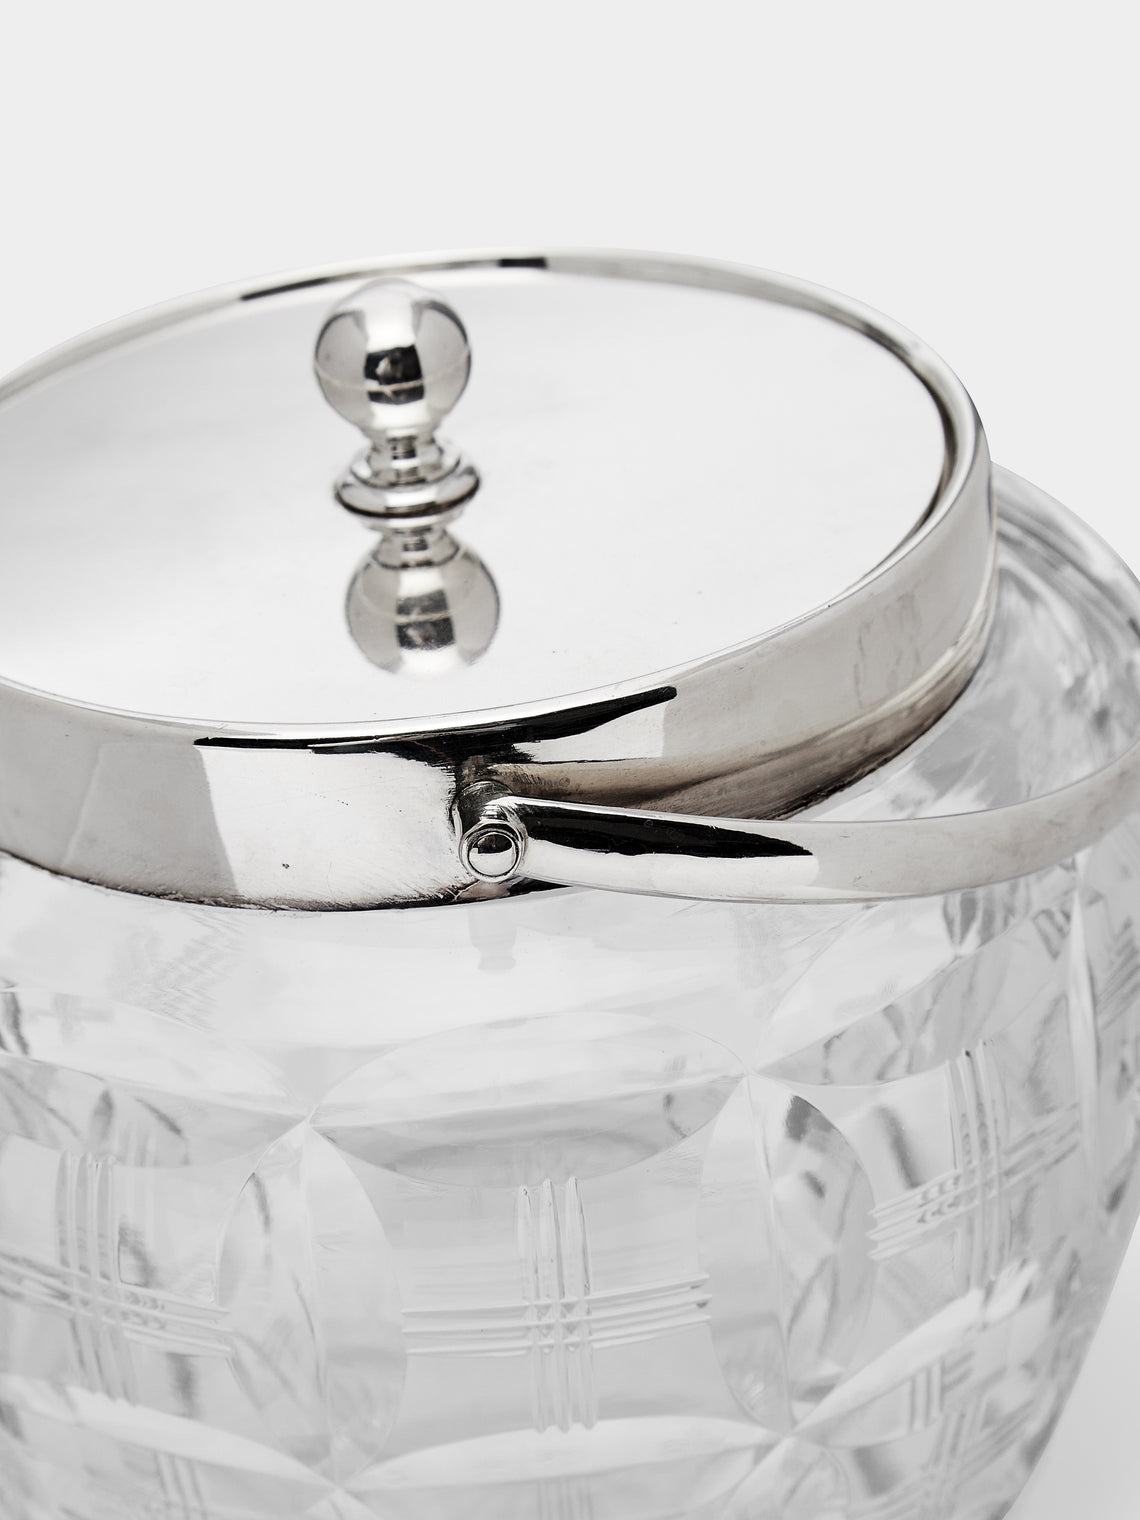 Antique and Vintage - 1940s Silver-Plated Cut Crystal Ice Bucket -  - ABASK